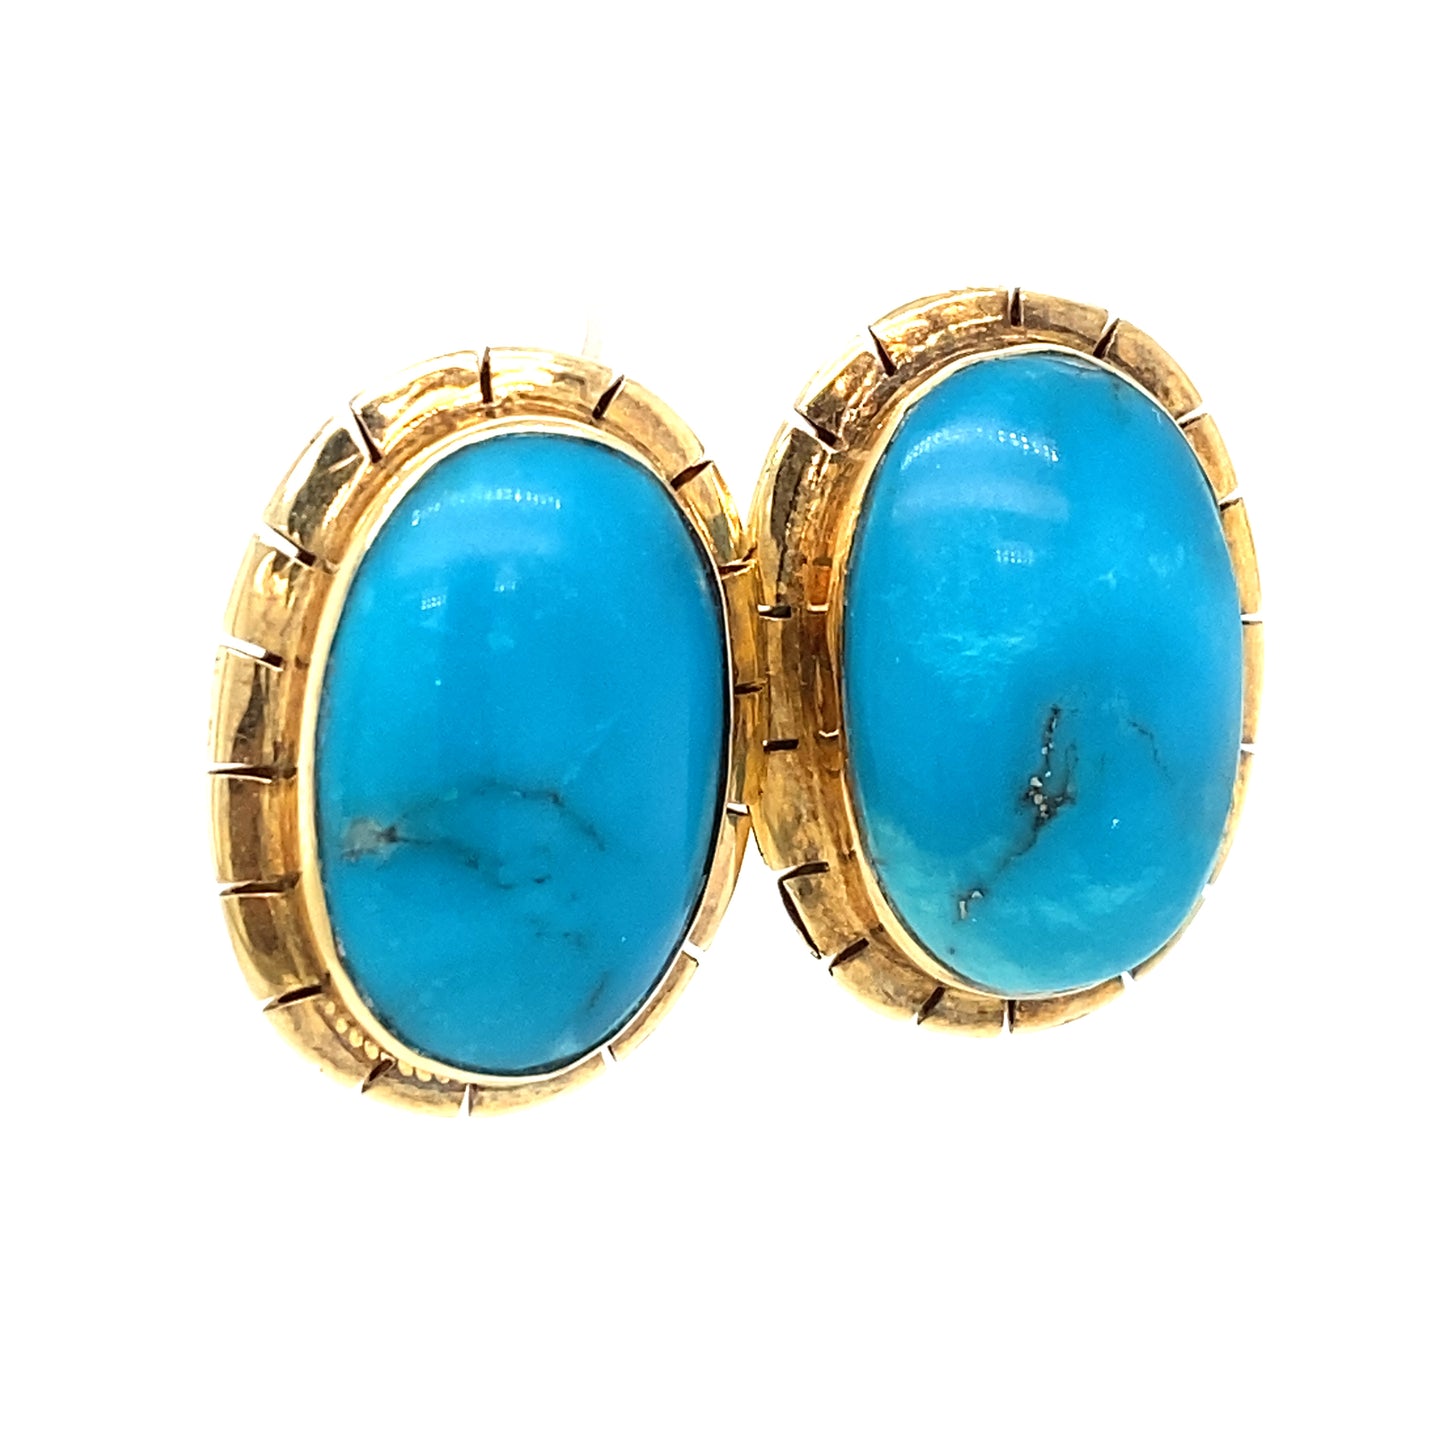 Circa 1960s Retro Oval Turquoise Earrings in 14K Gold